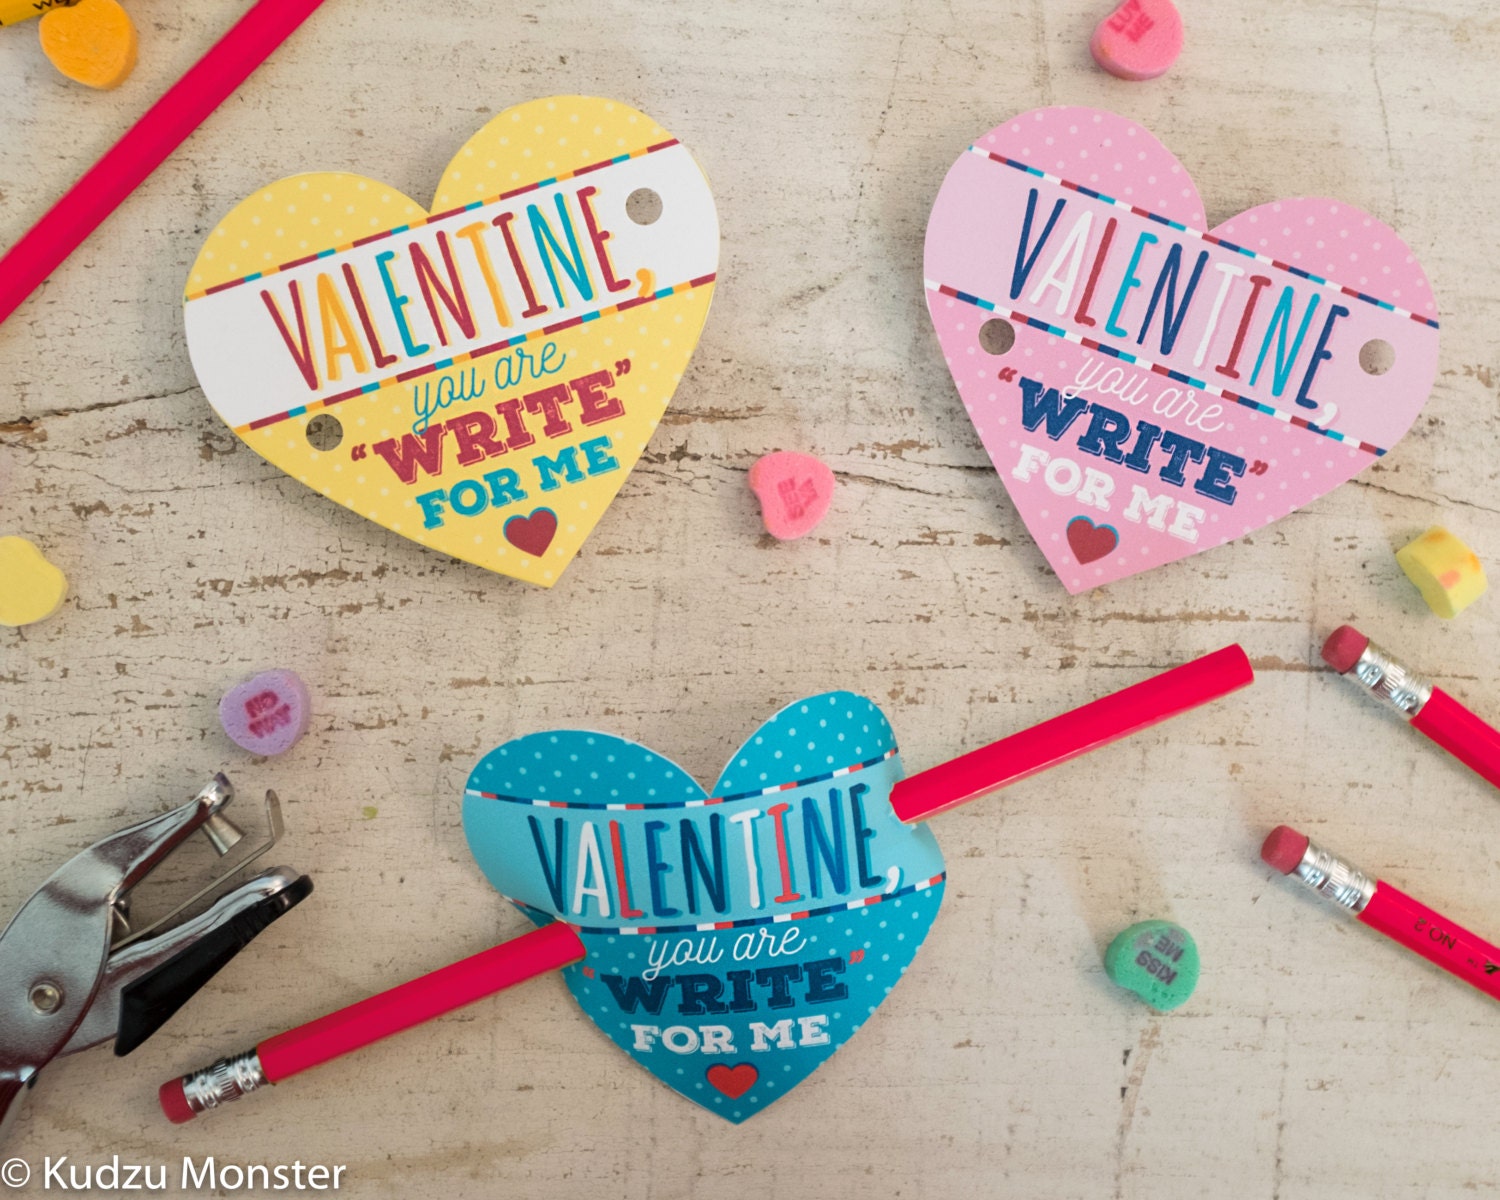 pencil-valentine-printable-heart-for-pencil-or-pen-non-candy-etsy